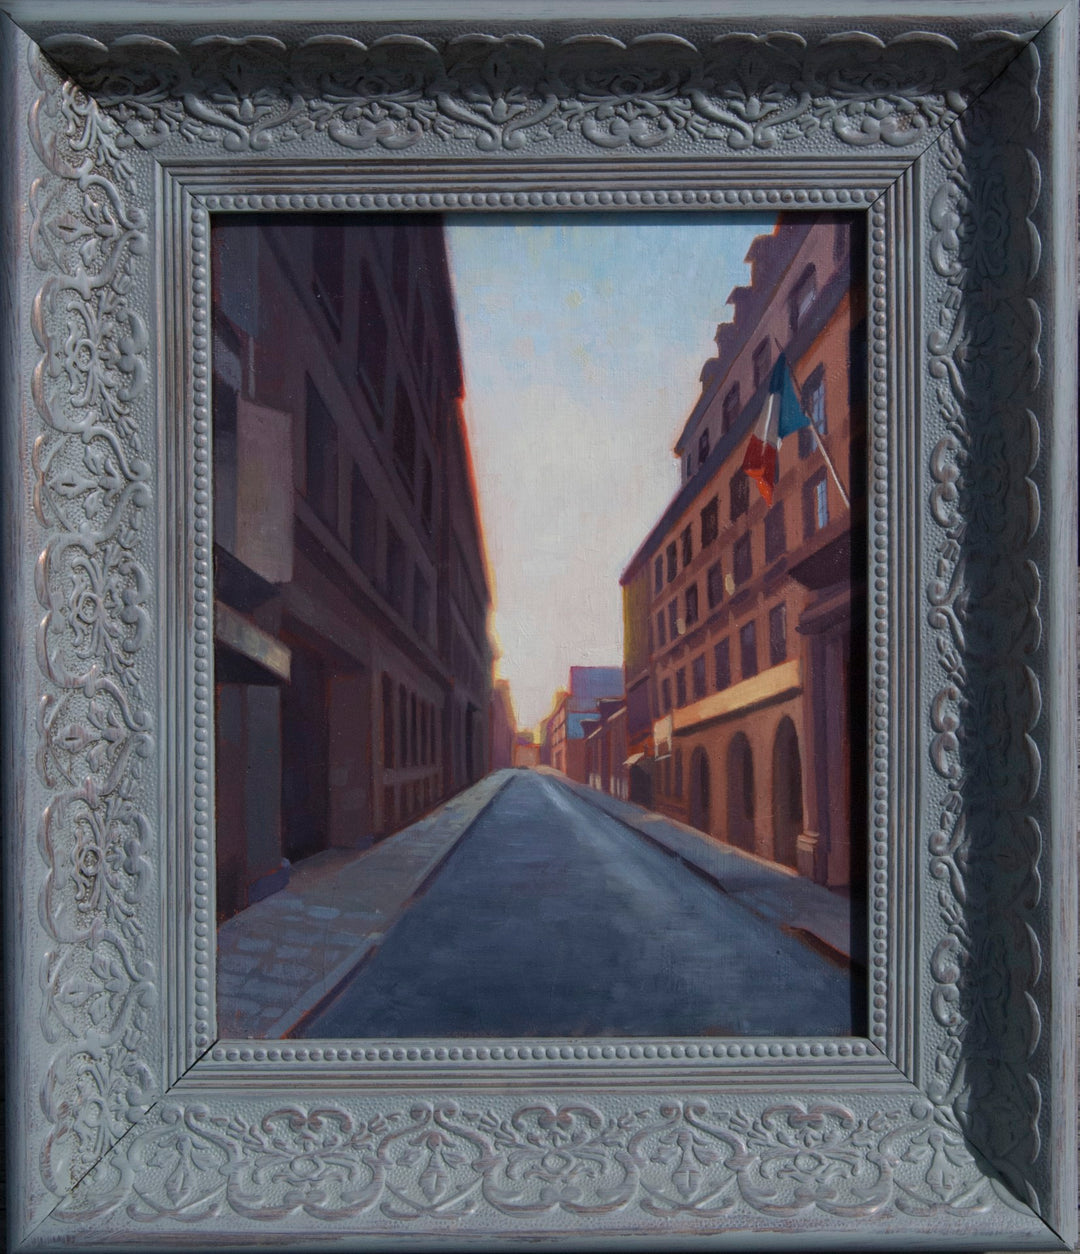 A Richard T Scott - "Paris Street 1" painting with buildings in the background, created by Richard T Scott using oil on canvas.